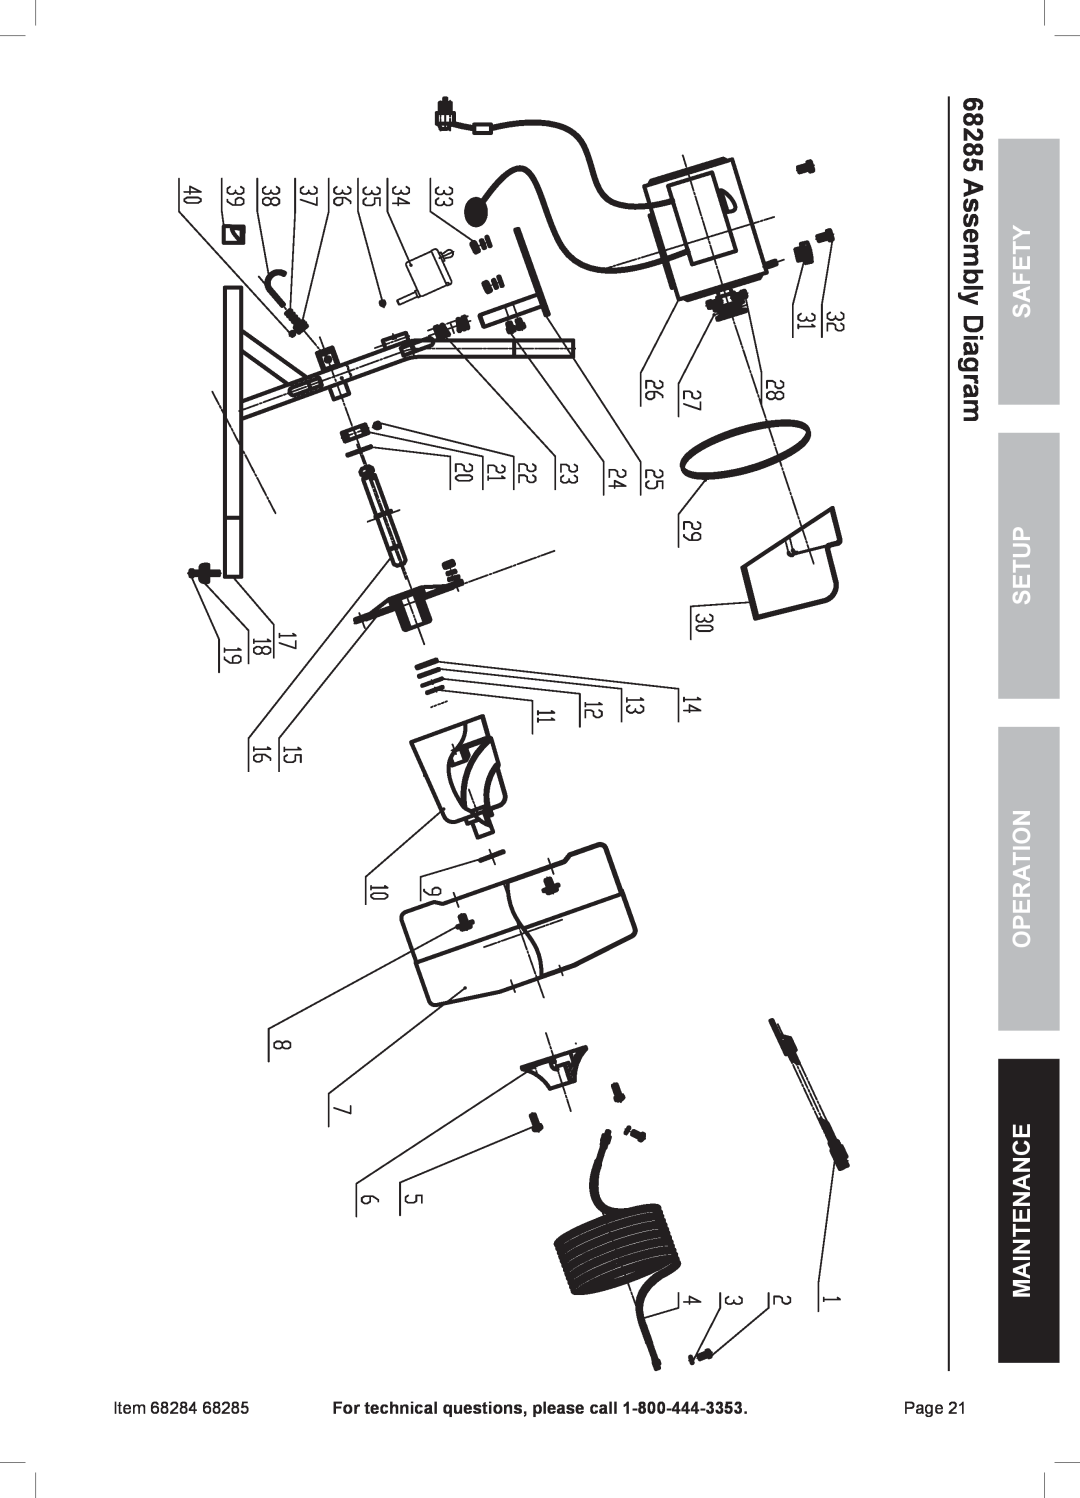 Harbor Freight Tools 68284, 68285 owner manual Assembly Diagram, Setup, Safety, Operation Maintenance 